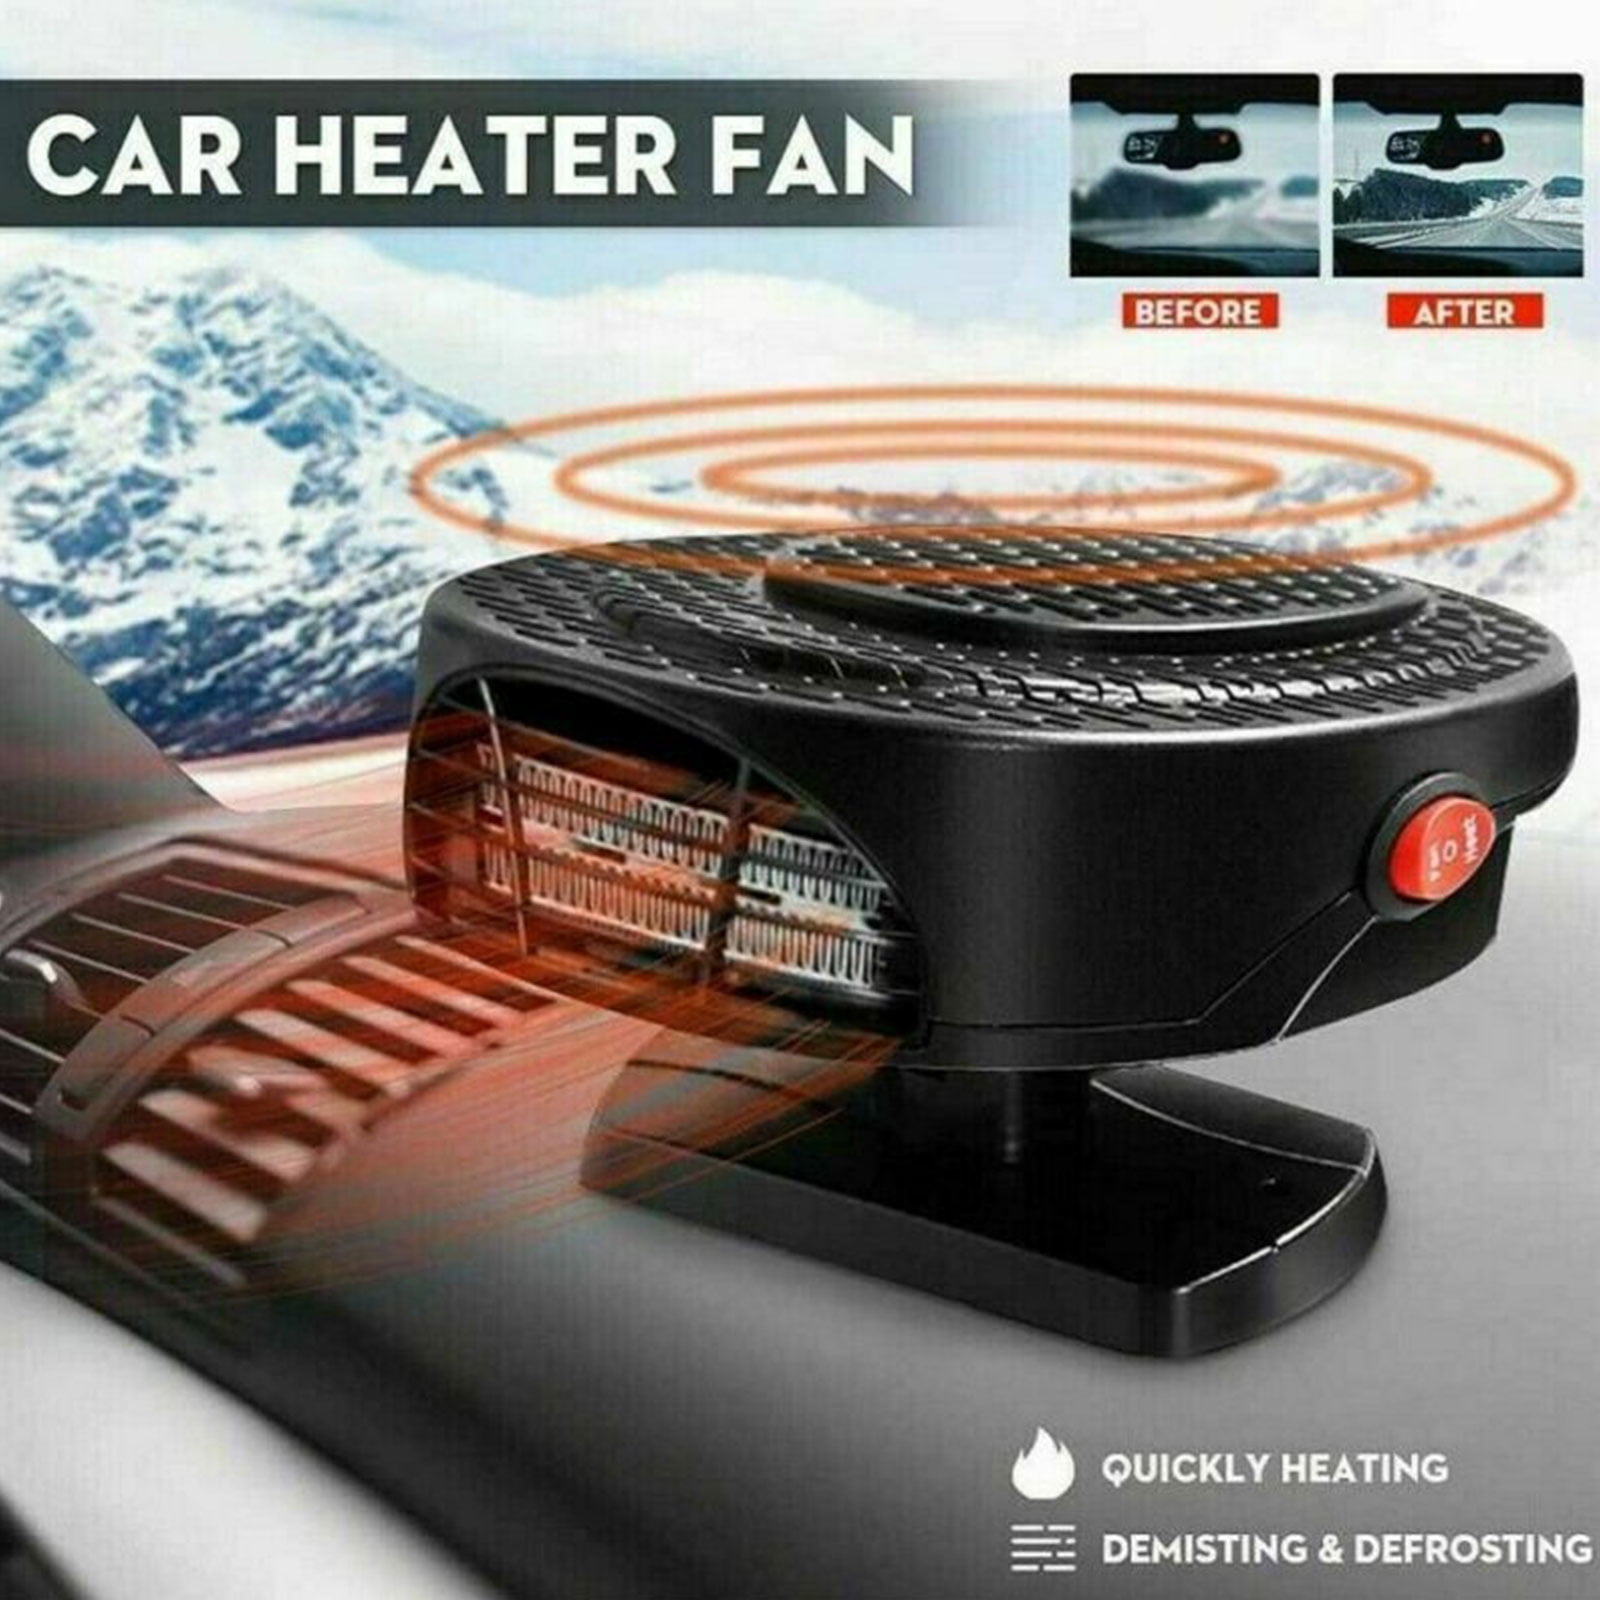 HTOCINQ Universal Car Heater, Portable Electronic Auto Fan Fast Defrost,  12V 150W Car Defogger, 2 in 1 Heating/Cooling Function, Plug Adjustable